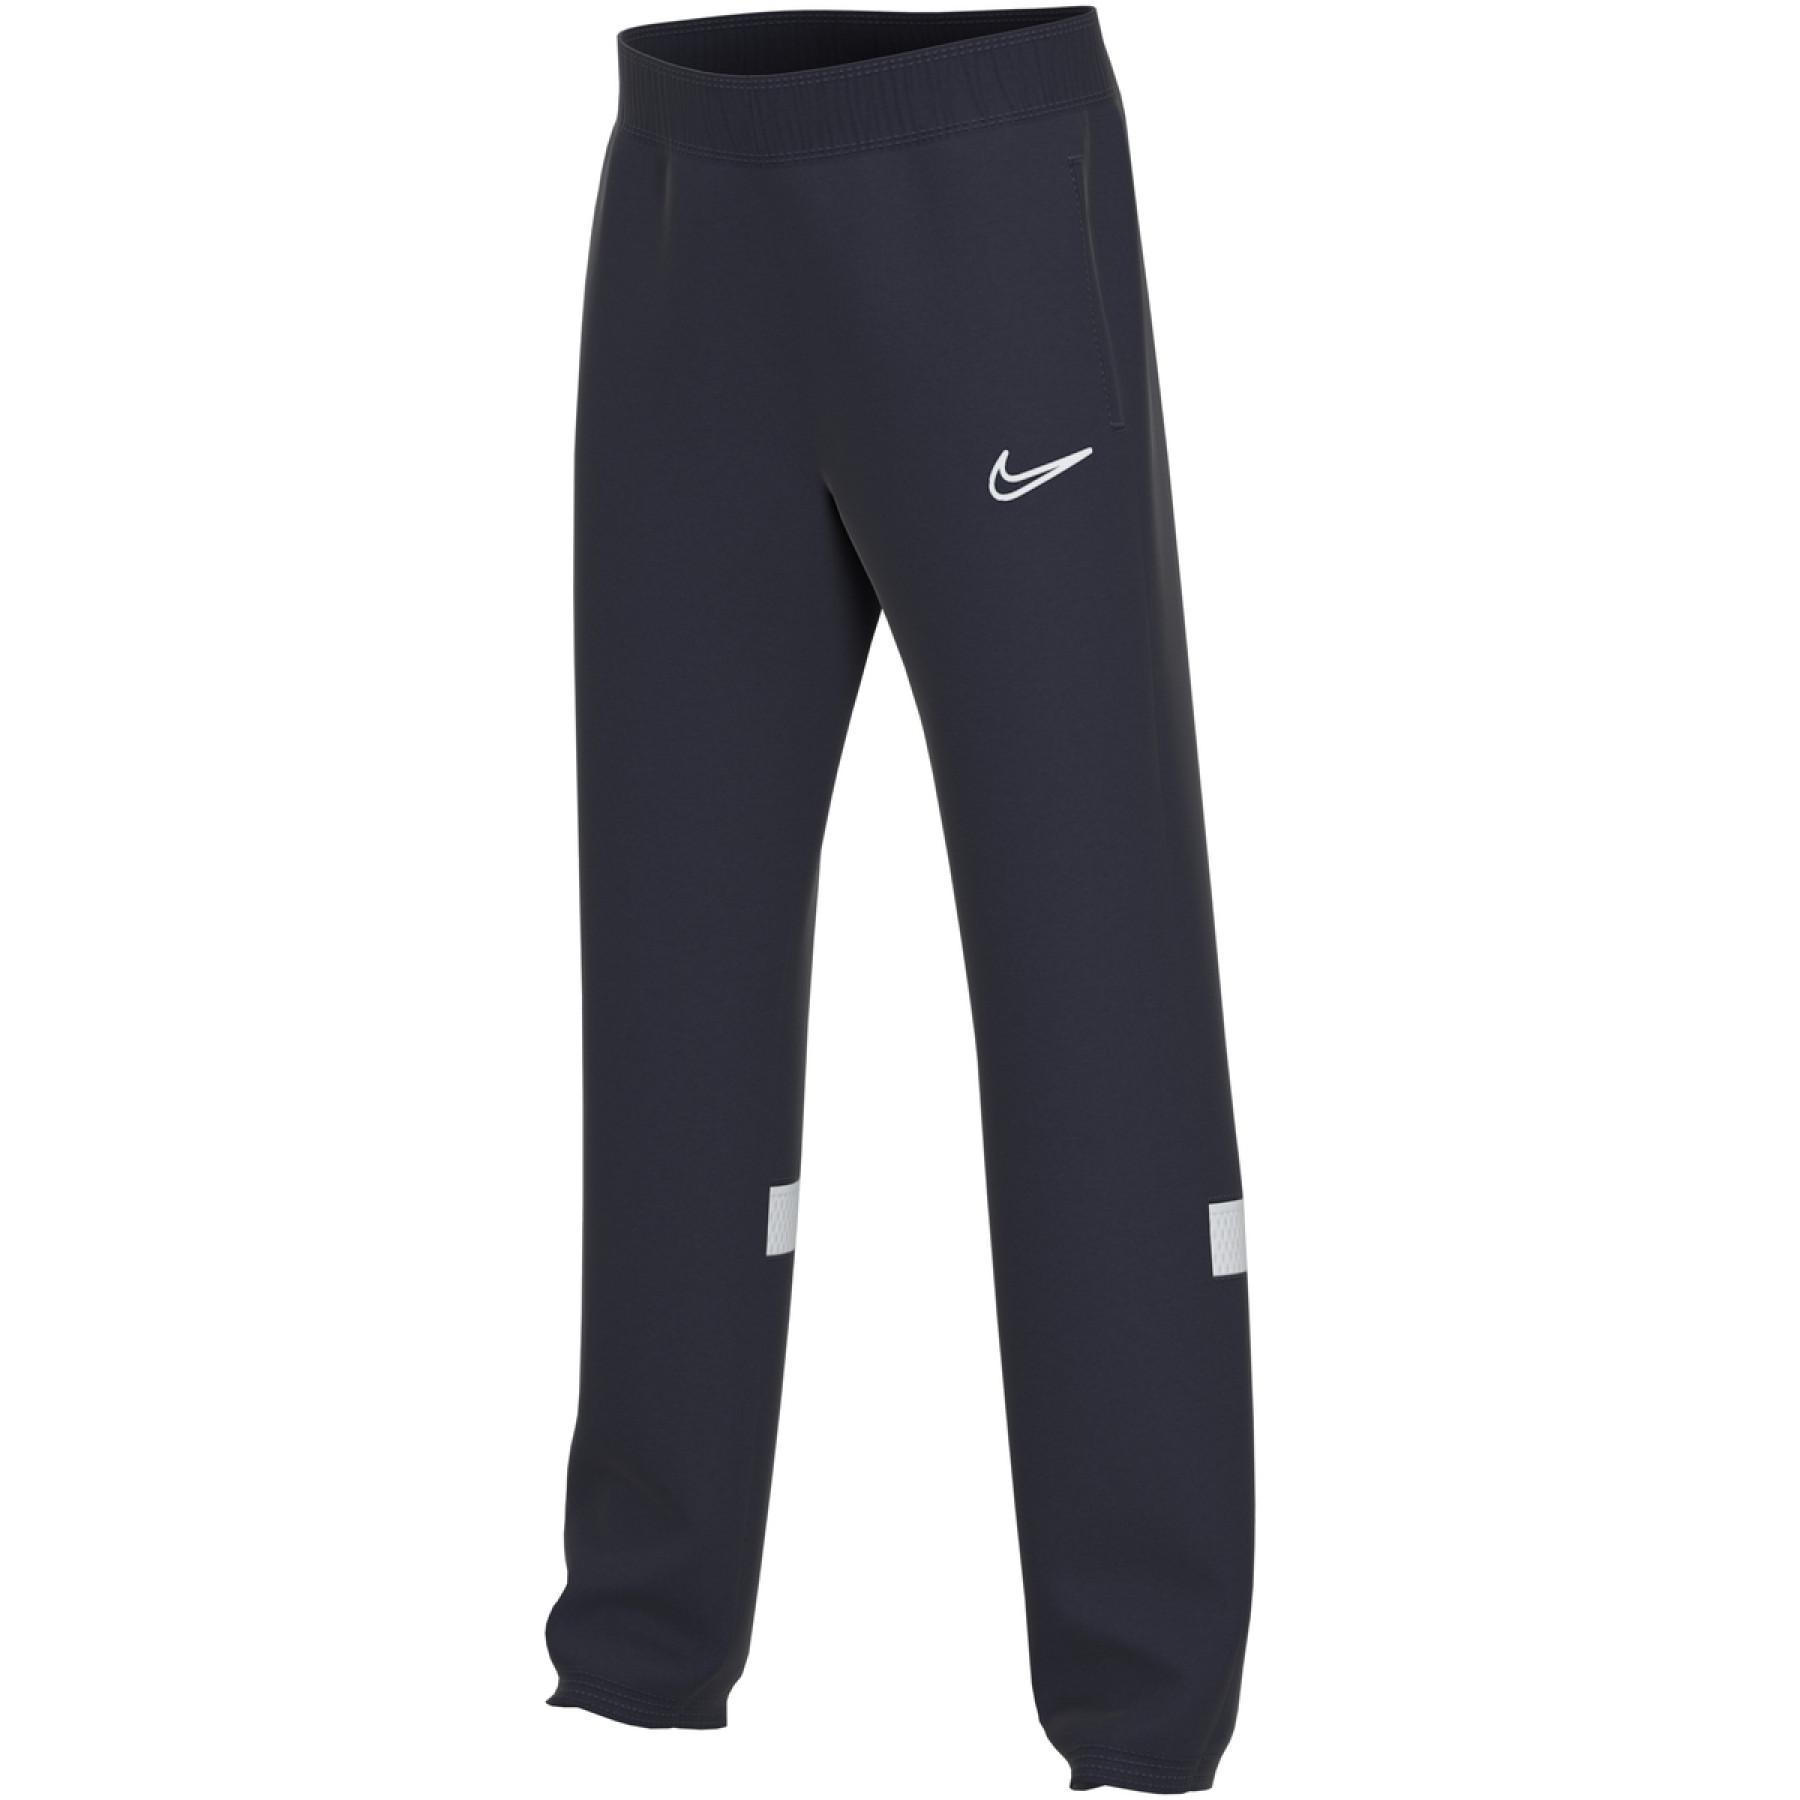 Children's trousers Nike Dynamic Fit